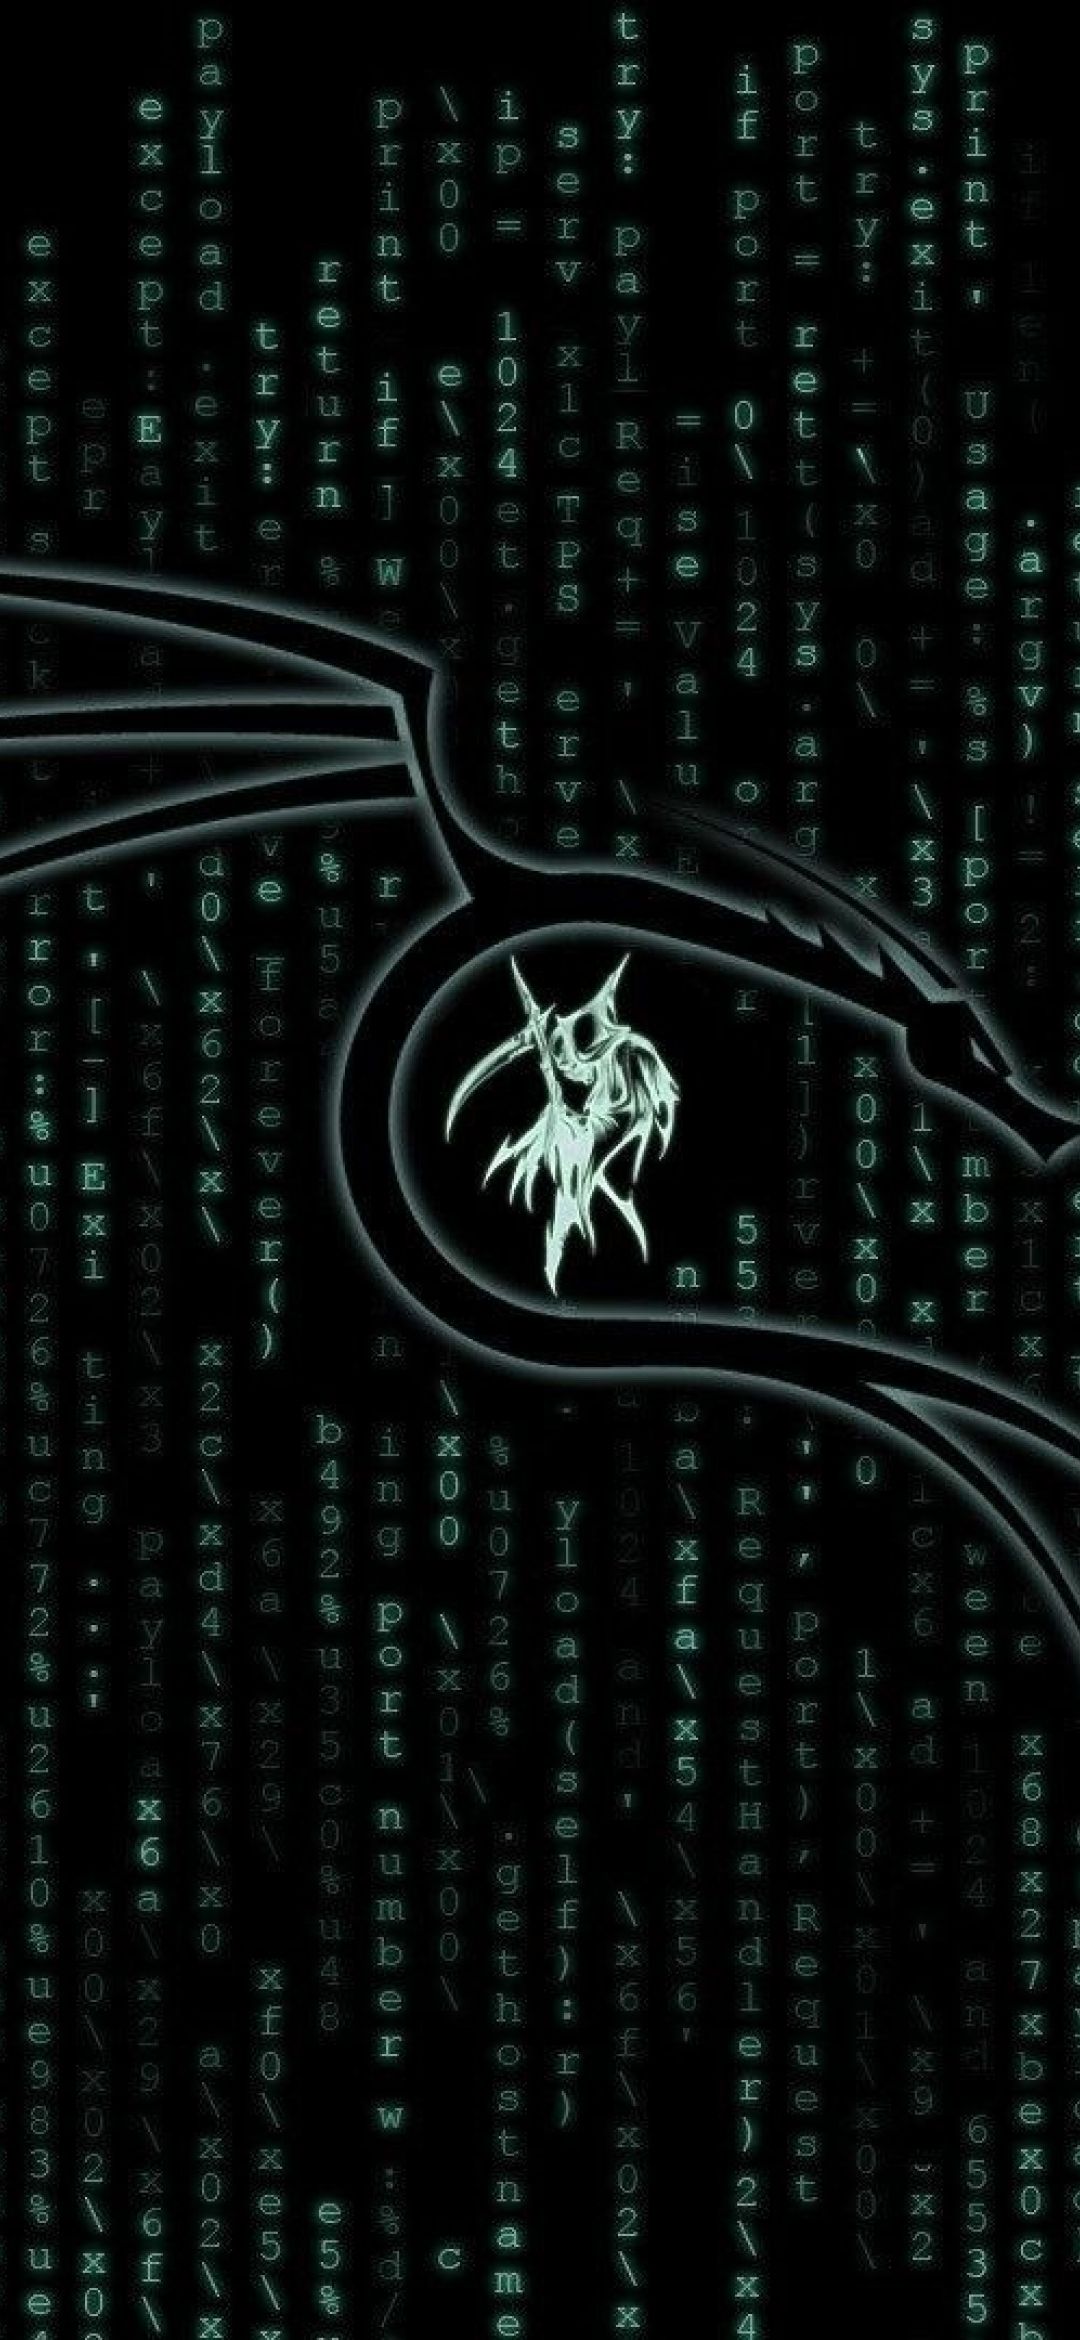 what is better for glaxy s9 kali nethunter or kali linux